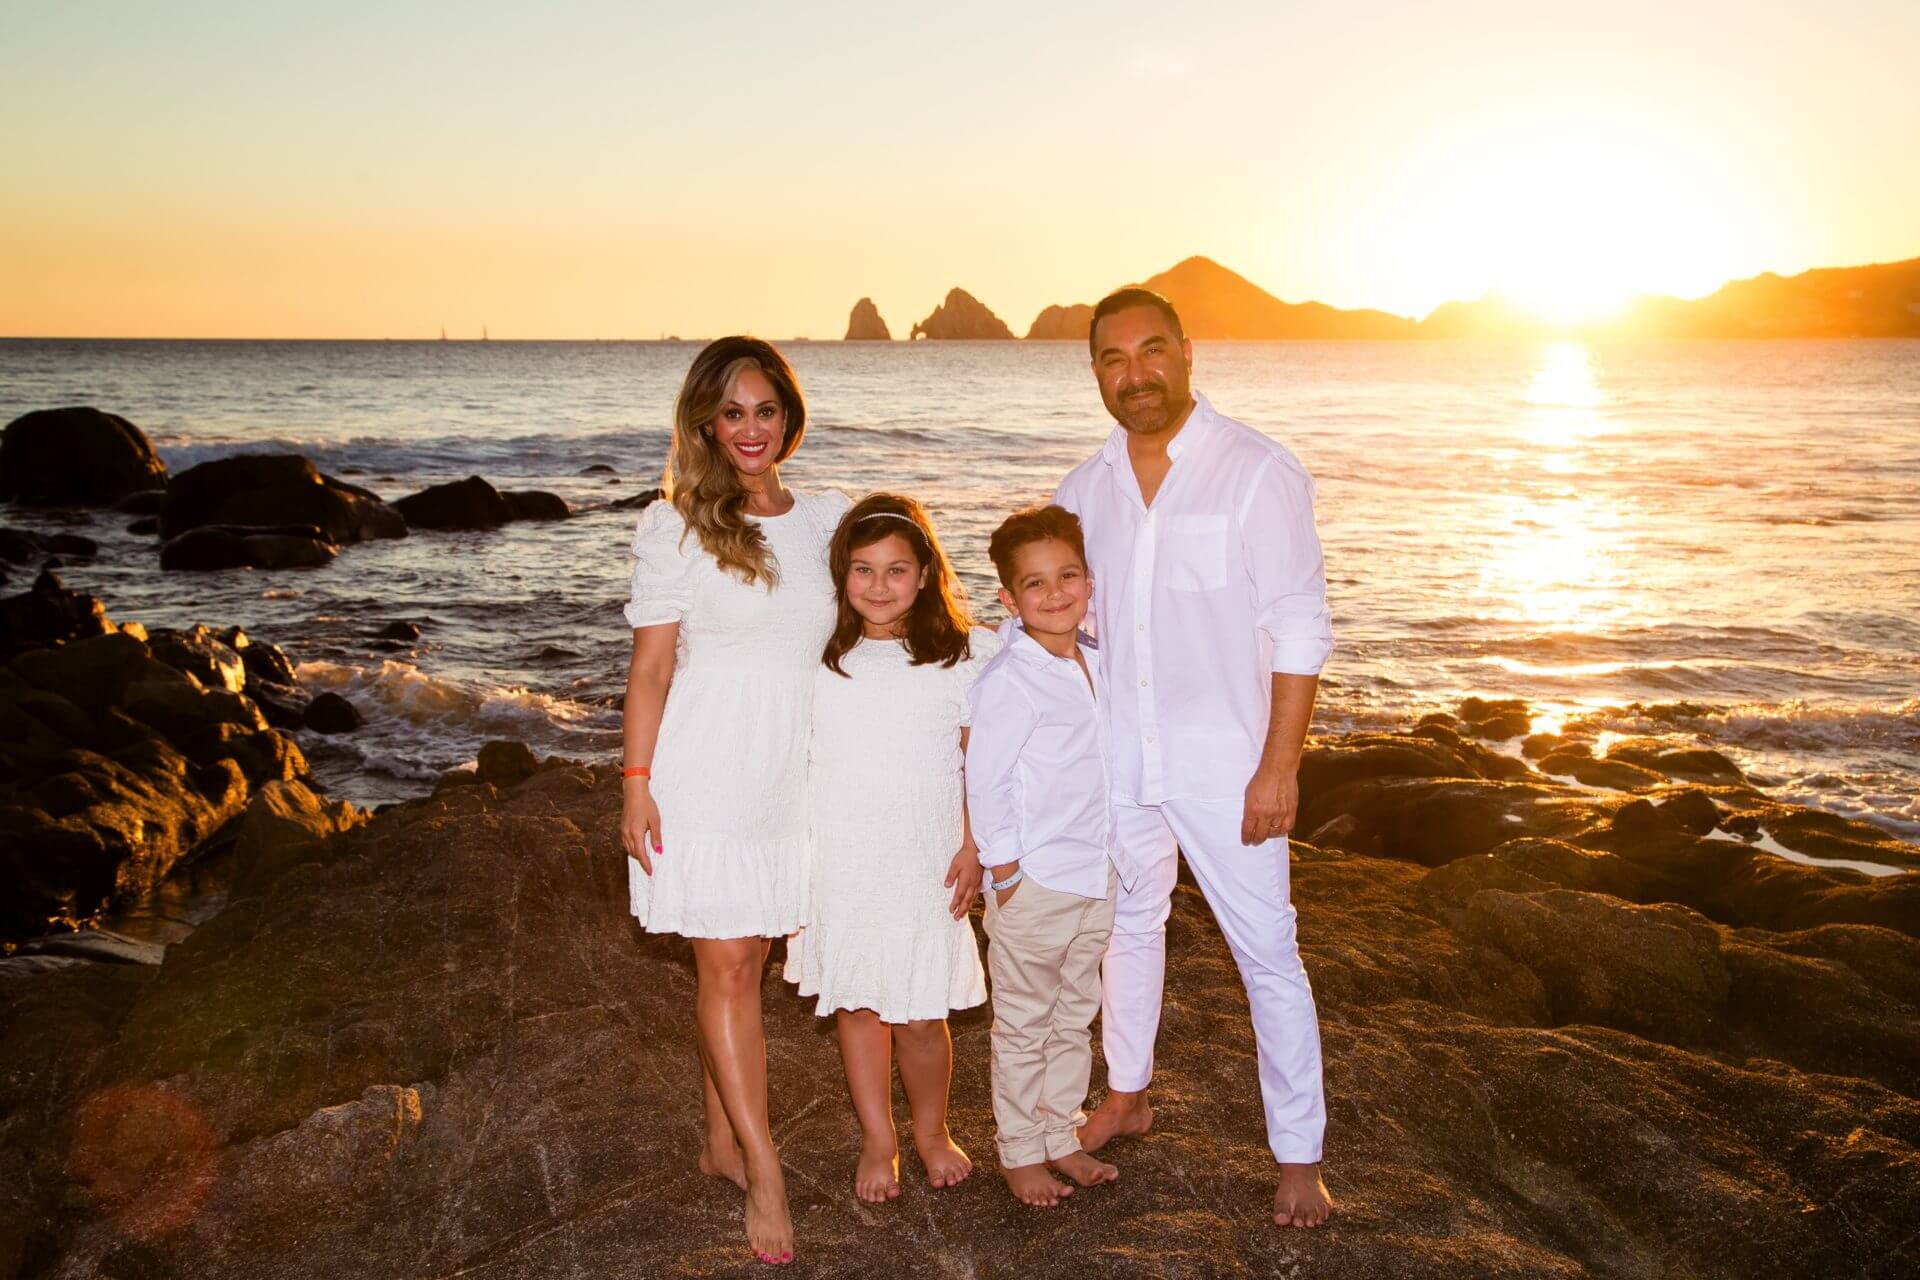 Wearing All White for Family Beach Photos | Local Lens